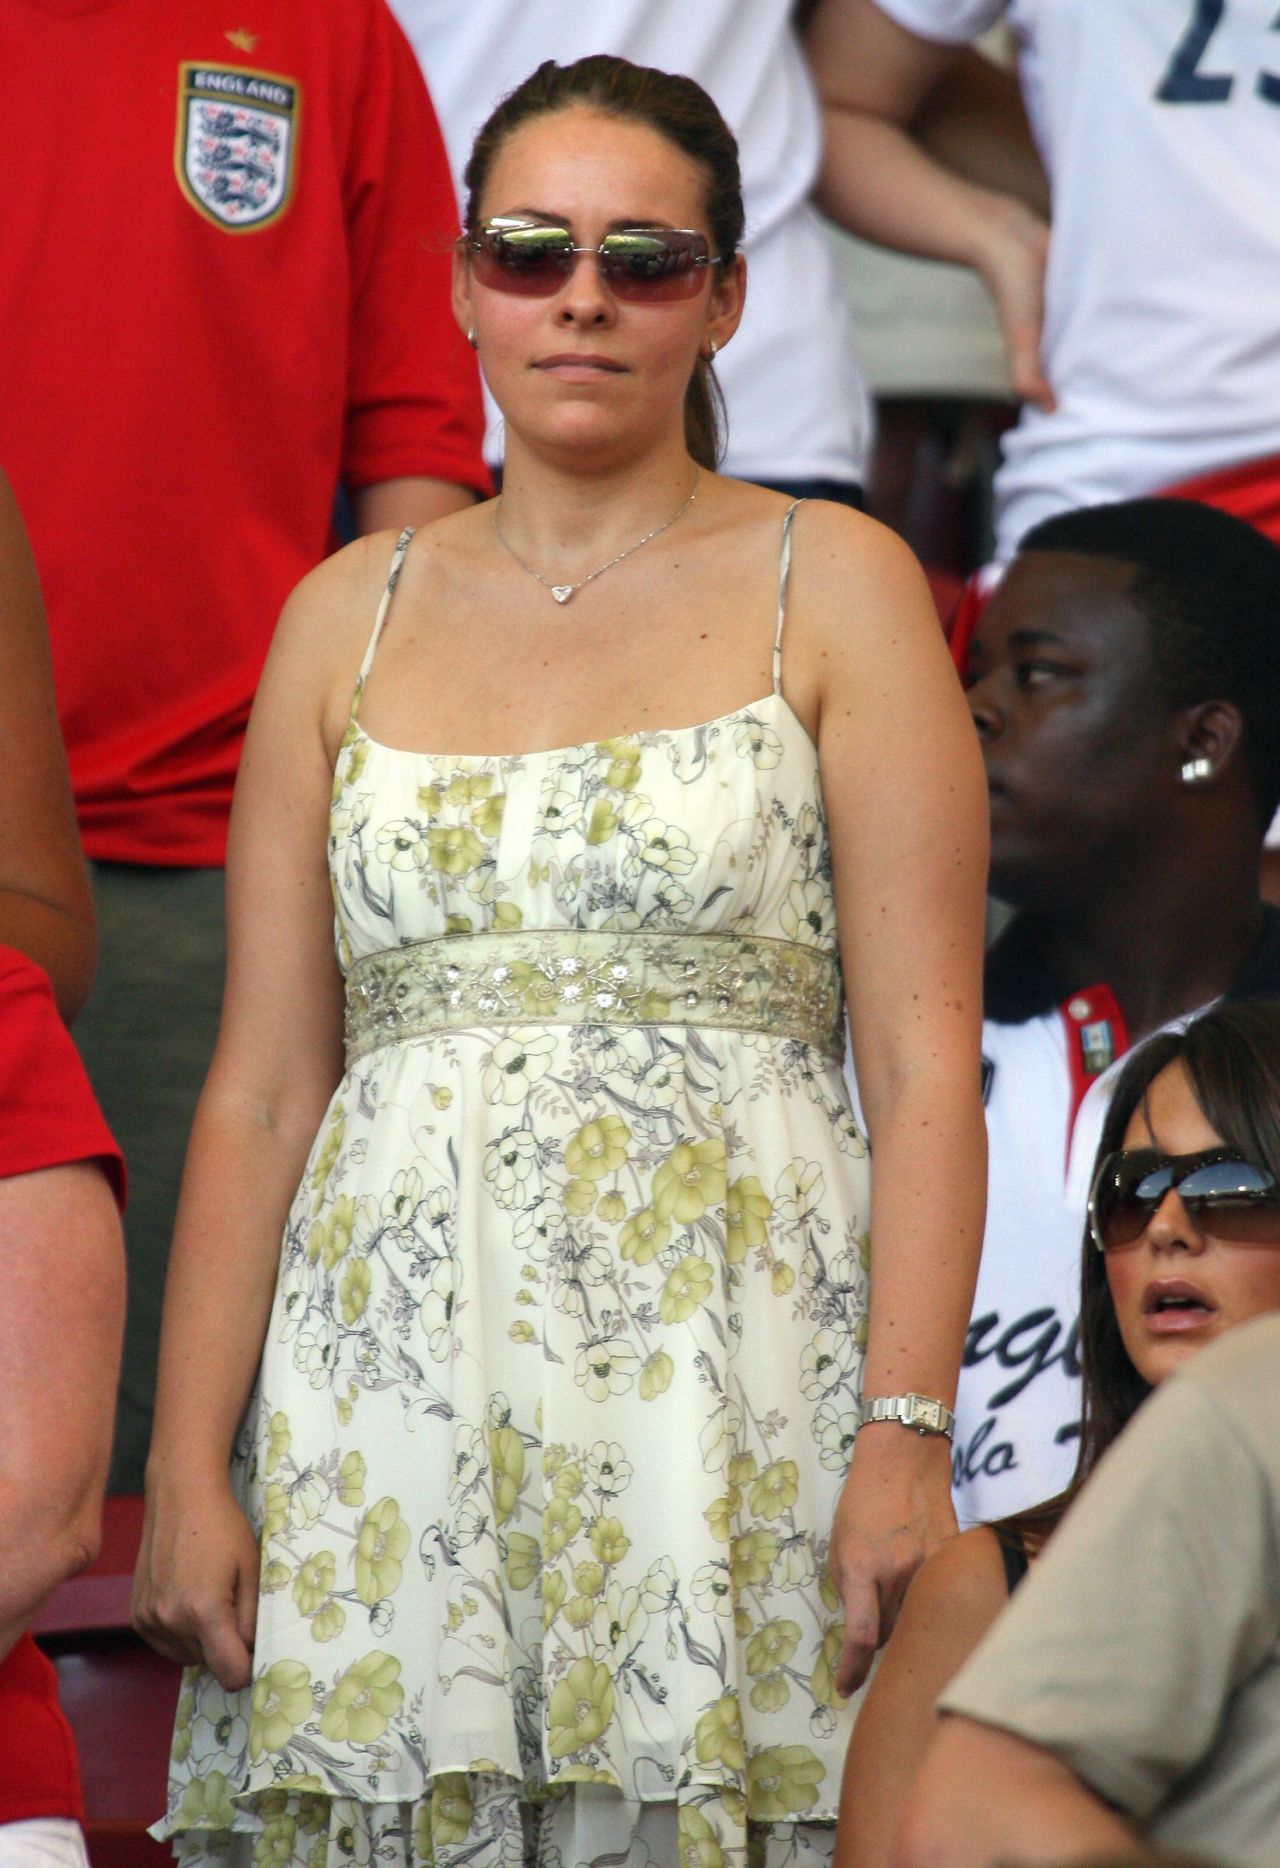 Born Rebecca Ellison, she is pictured here at the 2006 World Cup in Germany, when she was eight months pregnant with their first child Lorenz. 